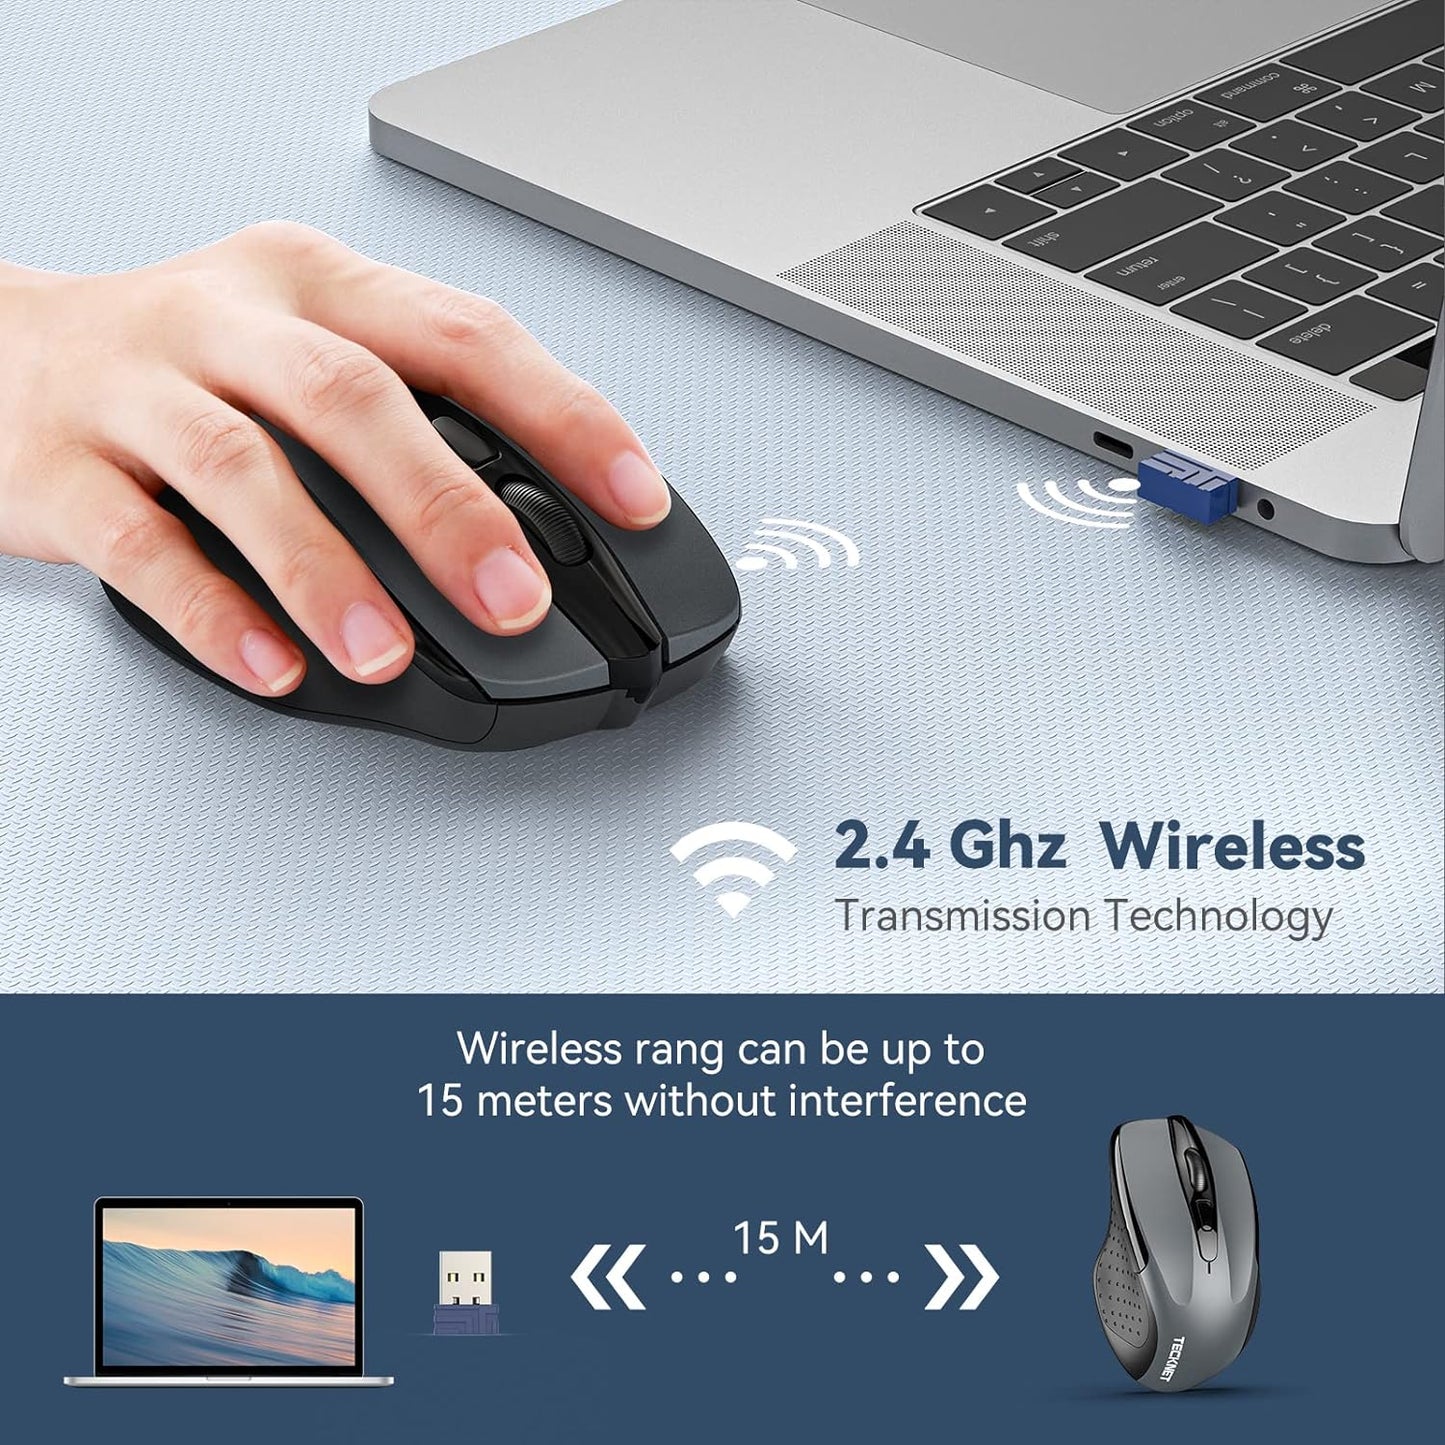 TECKNET Wireless Mouse, 2.4GHz Ergonomic Computer Mouse, Portable Cordless Mice, Mouse for Laptop, 6 Buttons USB Mouse for Chromebook, Ergo Grip, 24 Months Battery - Grey